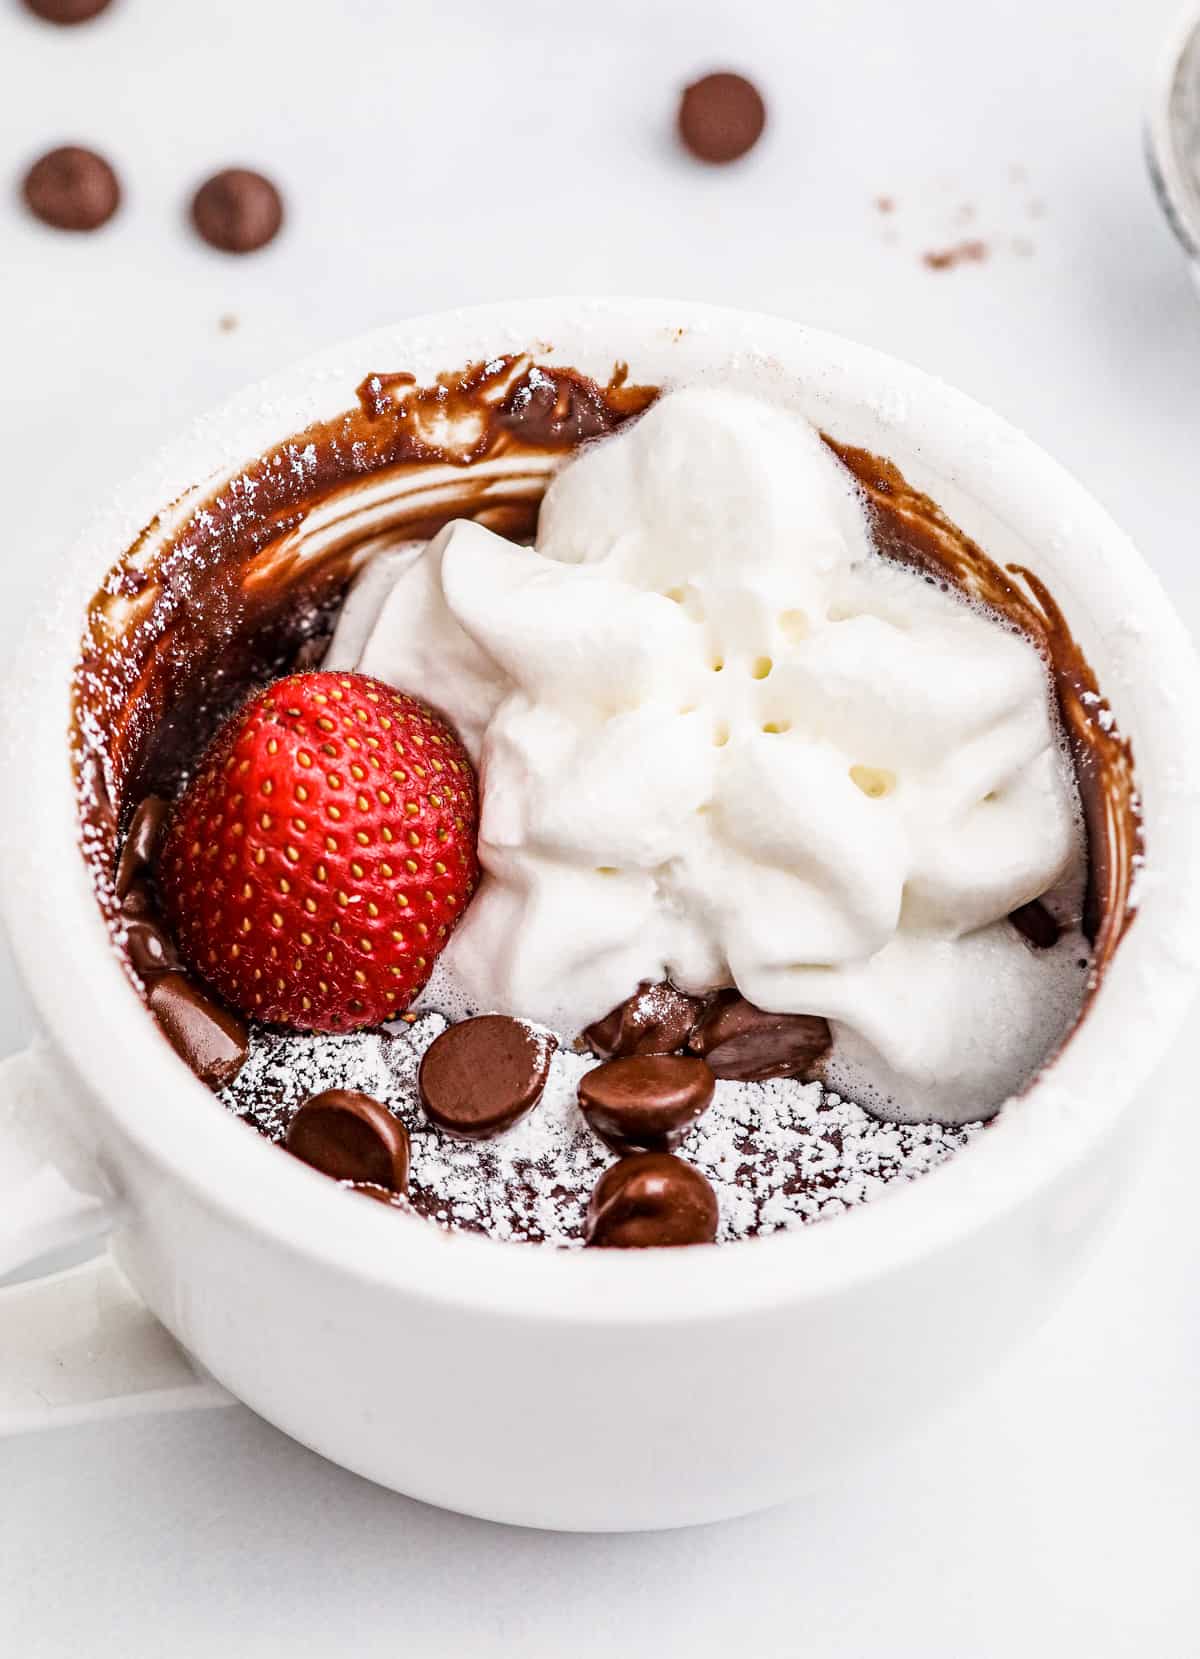 Finished Brownie in a Mug topped with powdered sugar, whipped cream and a strawberry.